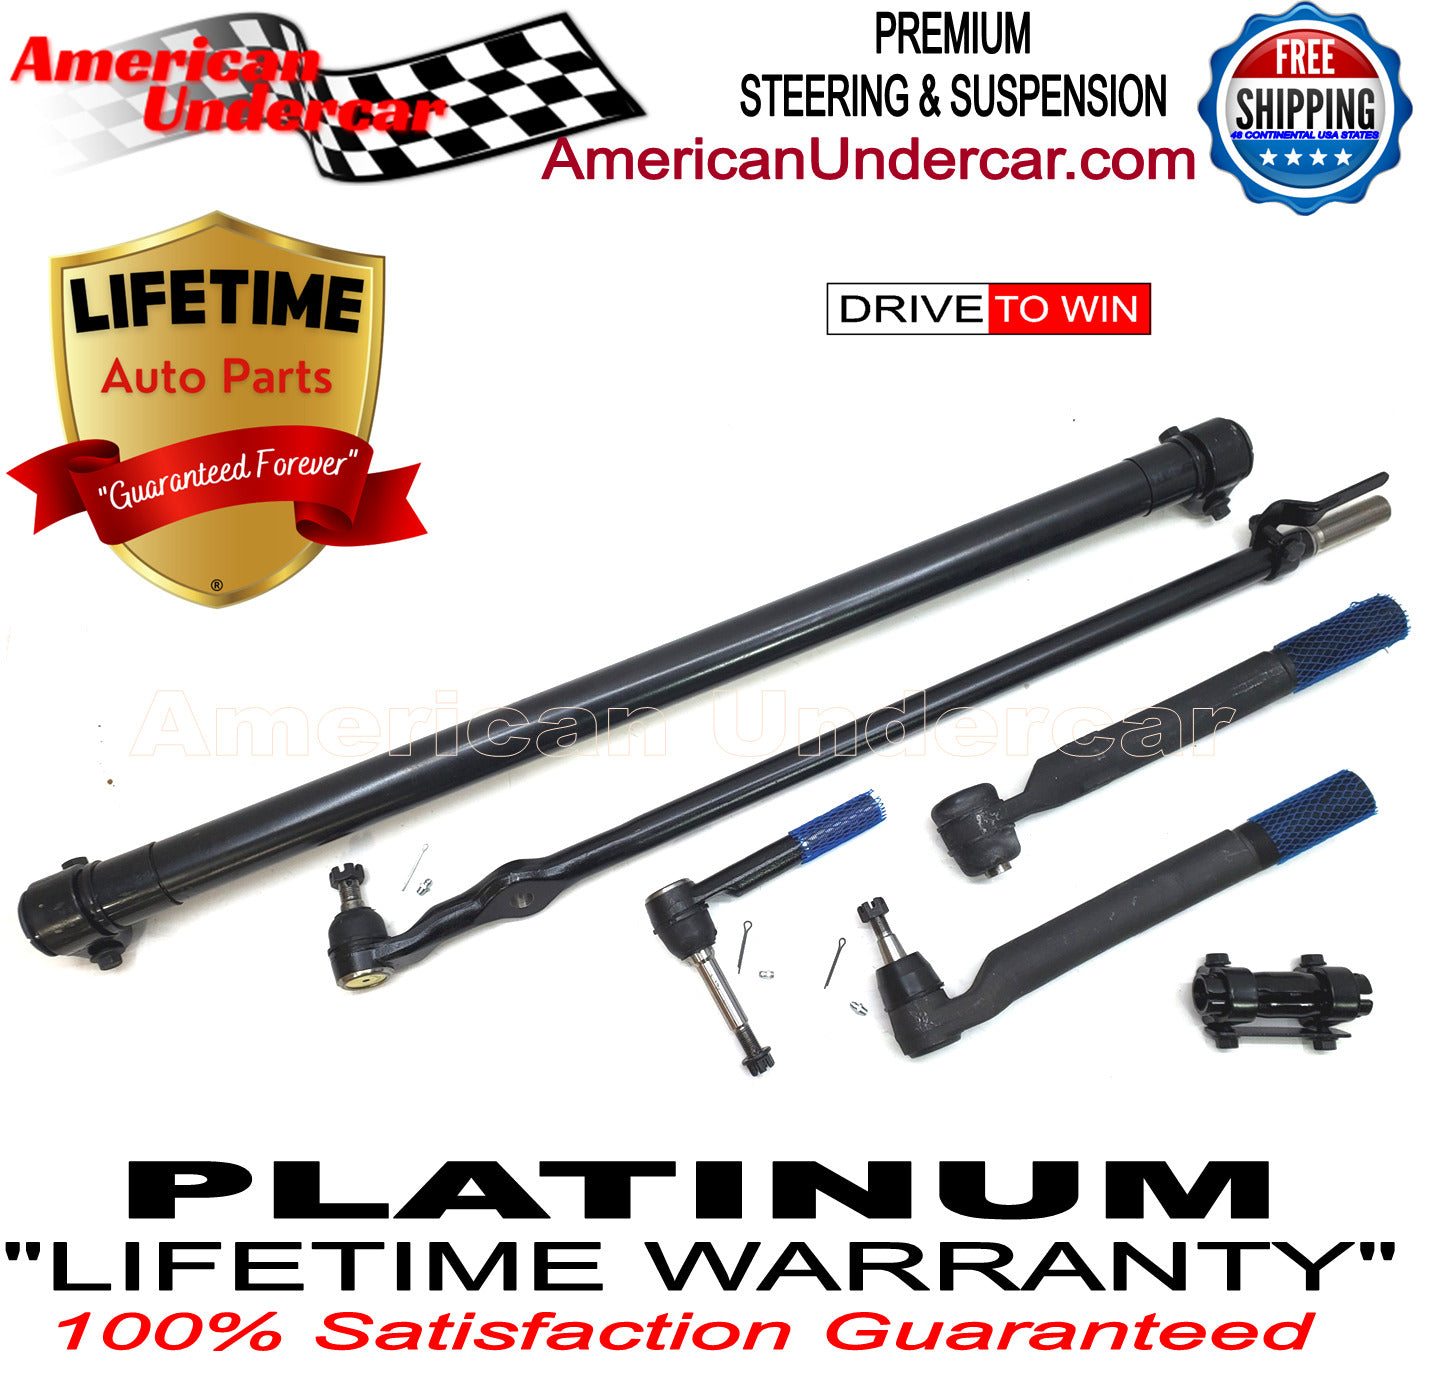 Lifetime Steering and Suspension Kit for 2011-2016 Ford F550 Super Duty 4x4